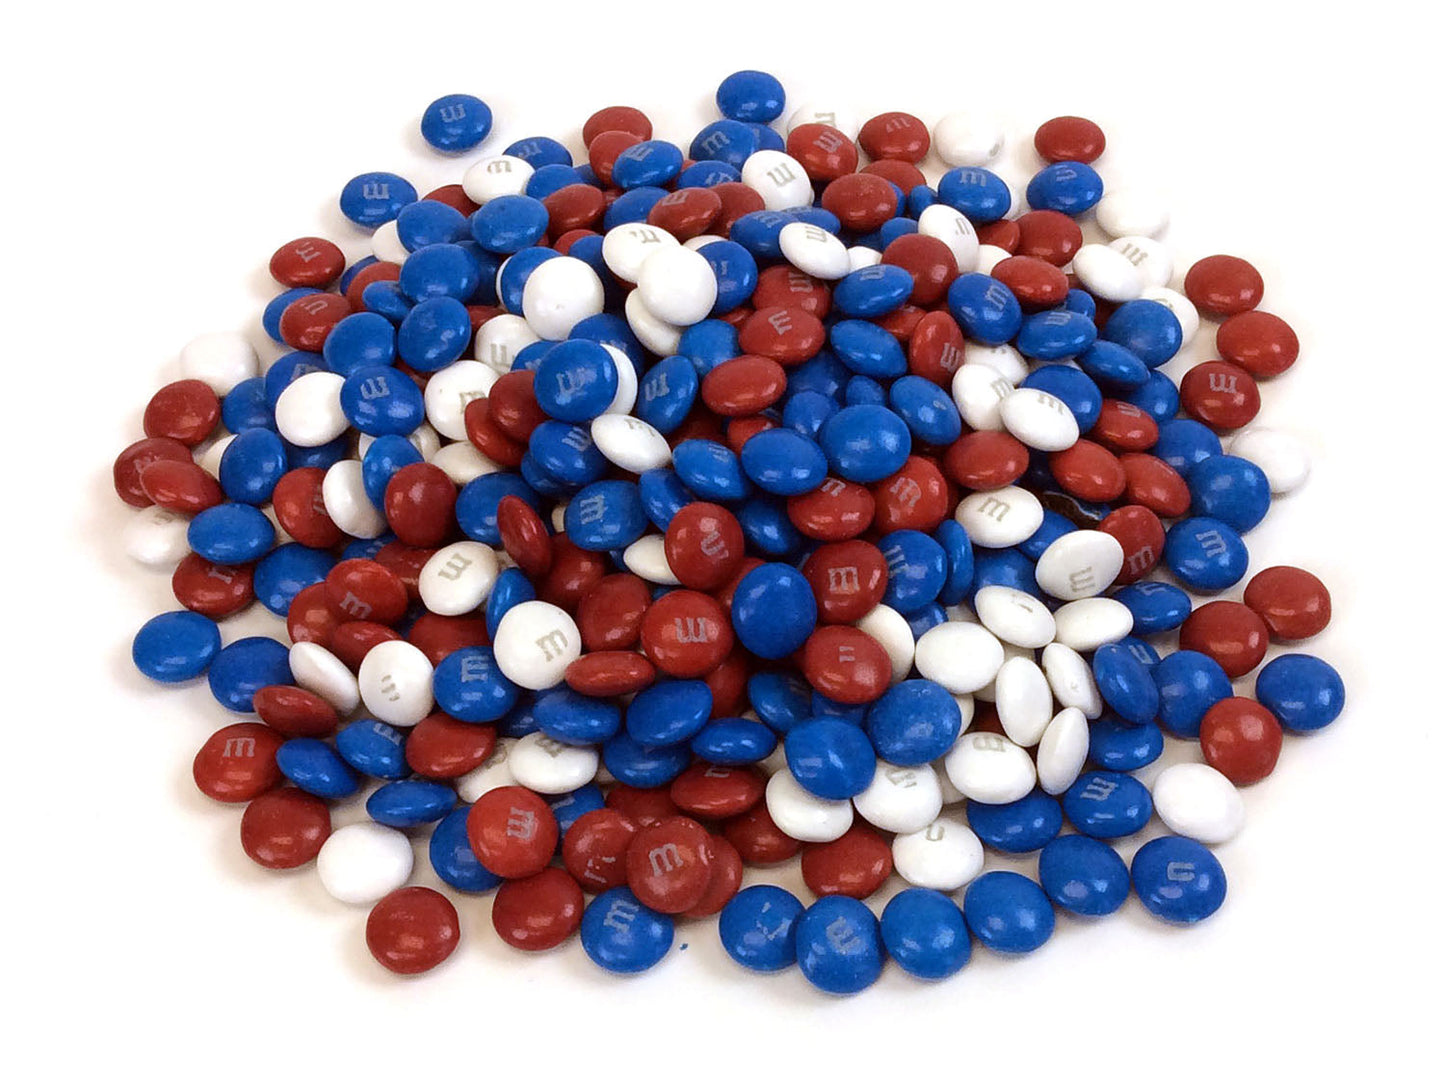 Red, White, and Blue Bulk Candy